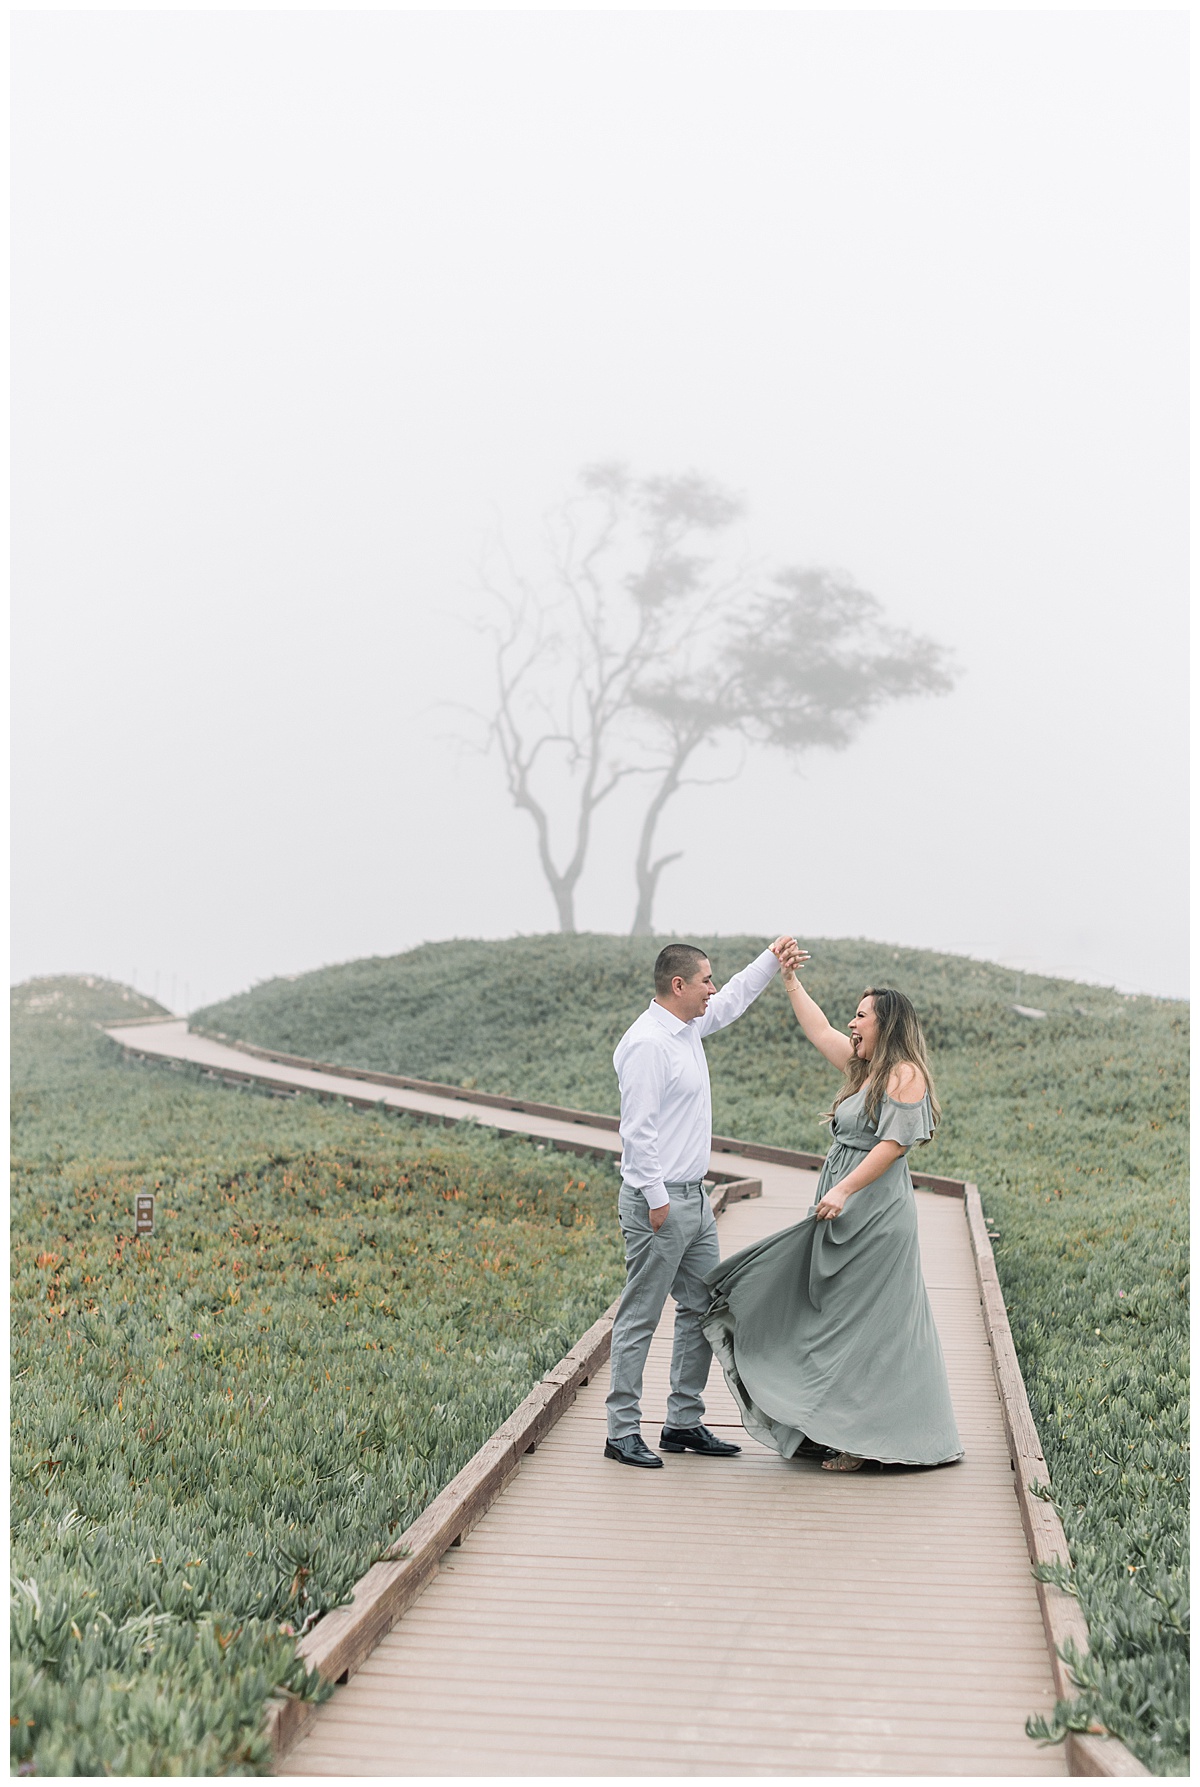 couple dancing on boardwalk in front of misty background